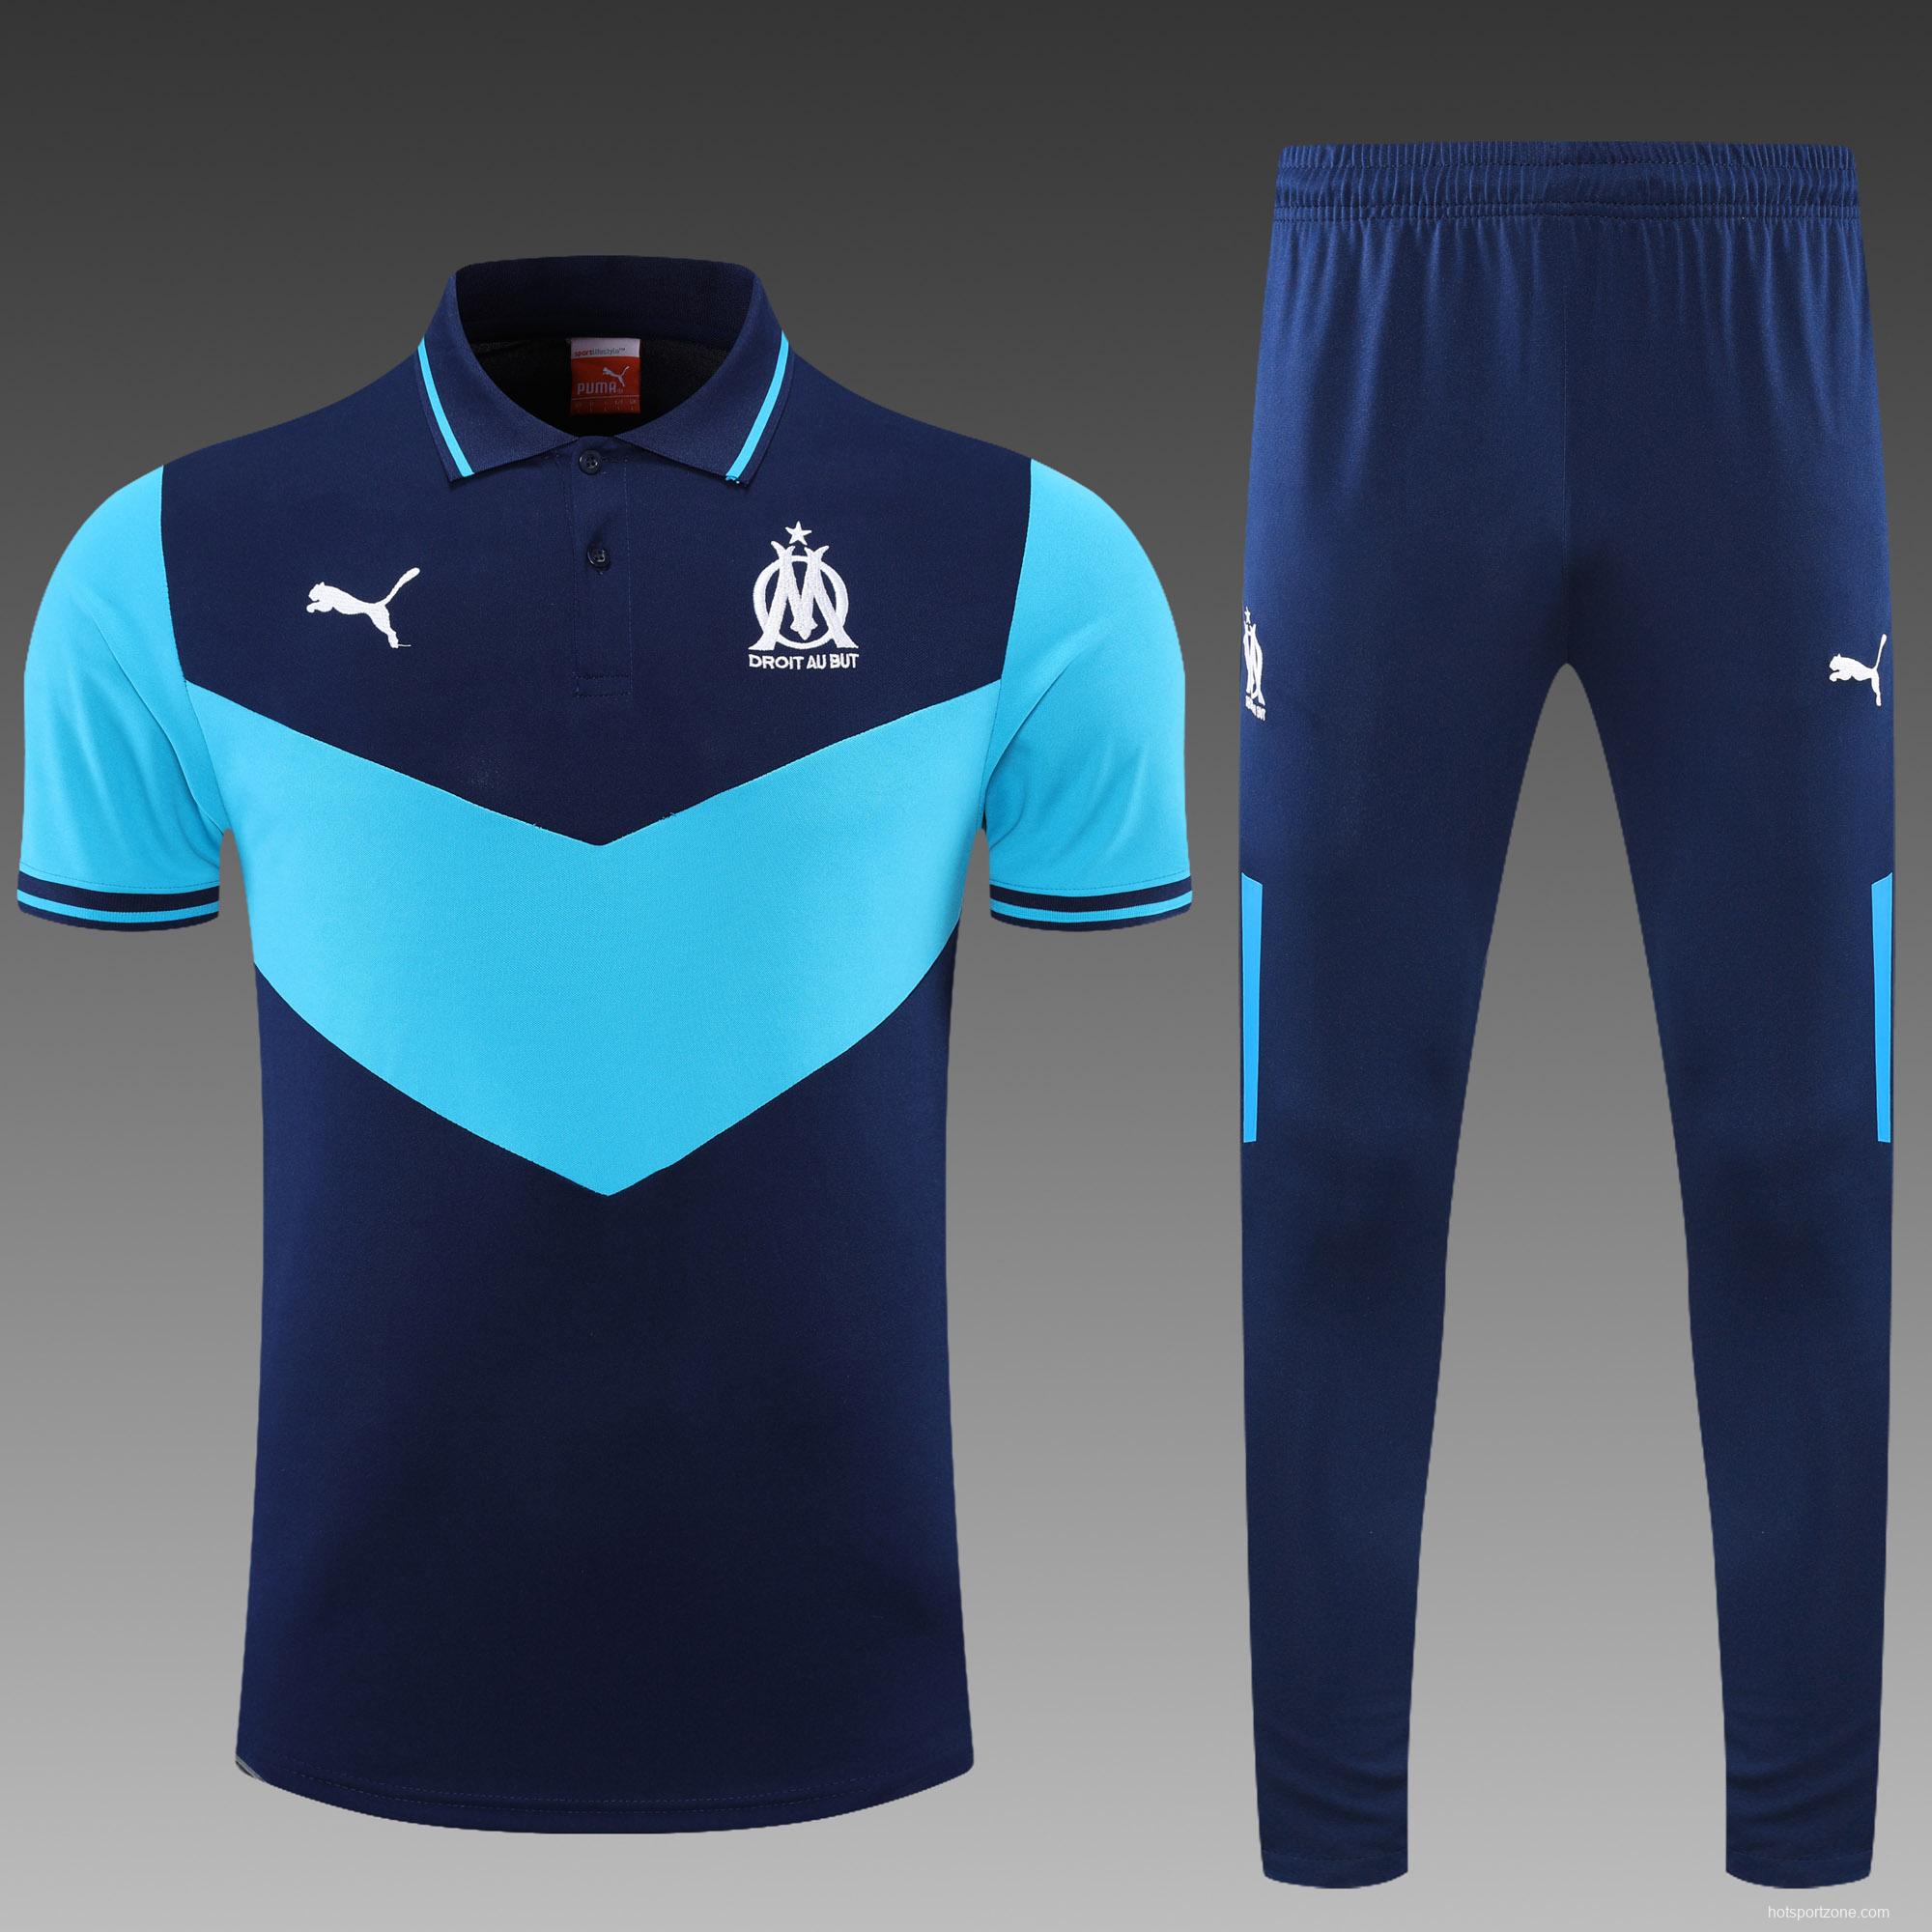 Olympique de Marseille POLO kit royal blue (not sold separately)